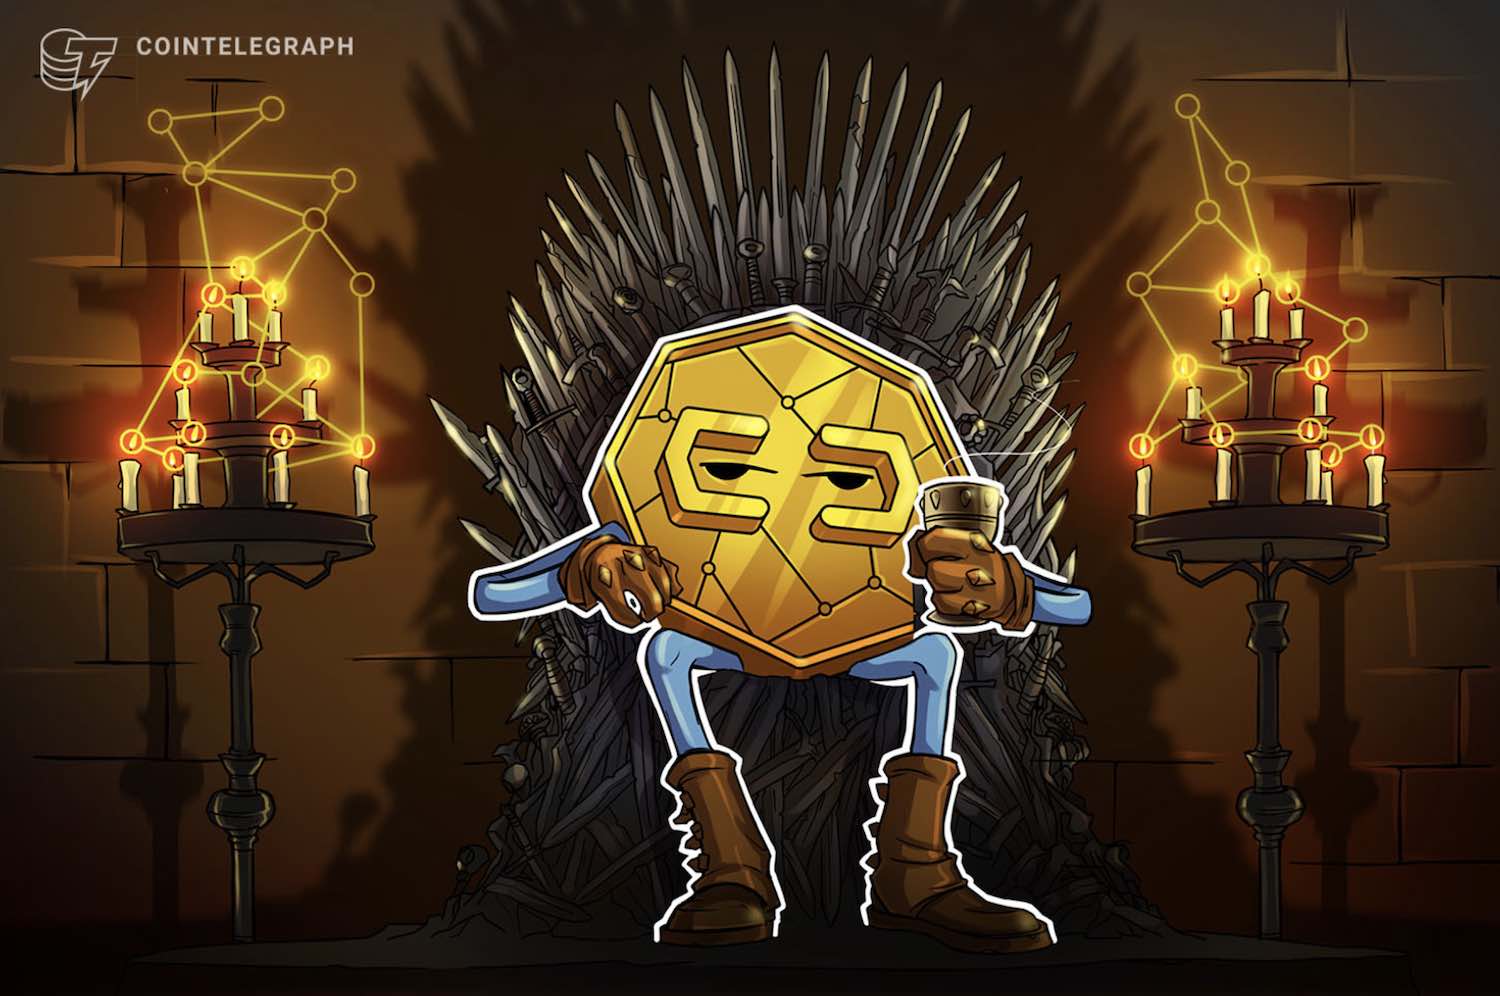 Game of Nodes — Who Will Win the Digital Throne?